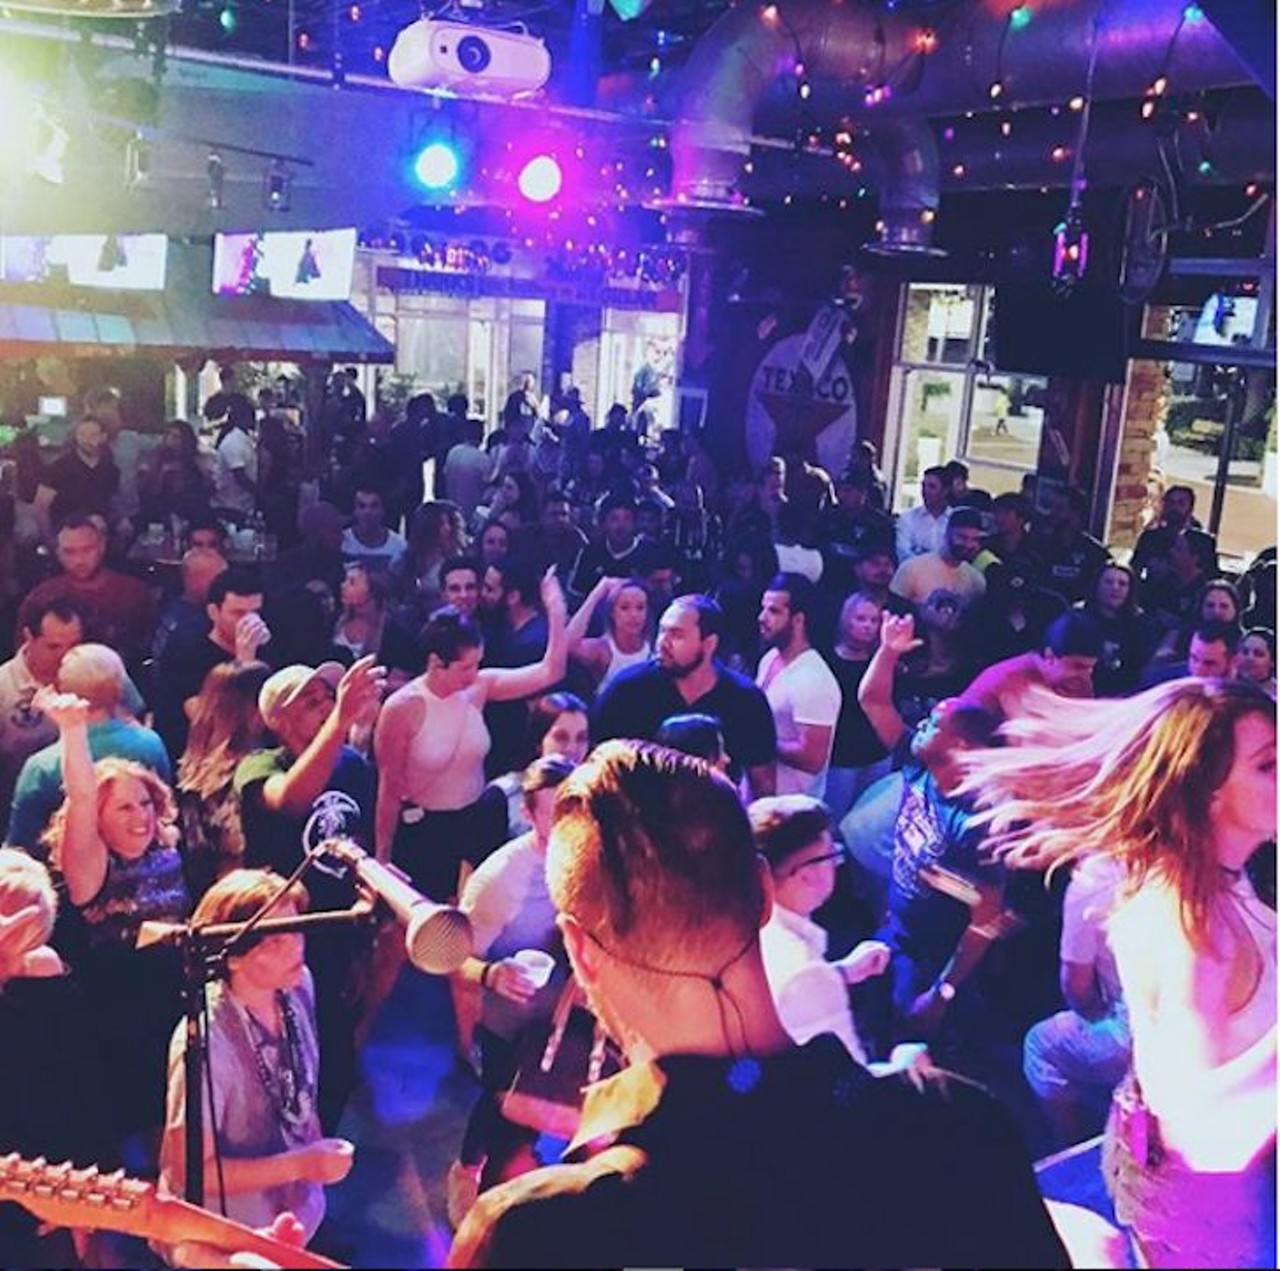 Tin Roof Orlando  
8371 International Drive, 407-270-7926
Known for their live music and prime location on I-drive, Tin Roof Orlando is a great way to liven up Sunday brunch served with $15 bottomless mimosas.
Photo via Instagram/Tin Roof Orlando